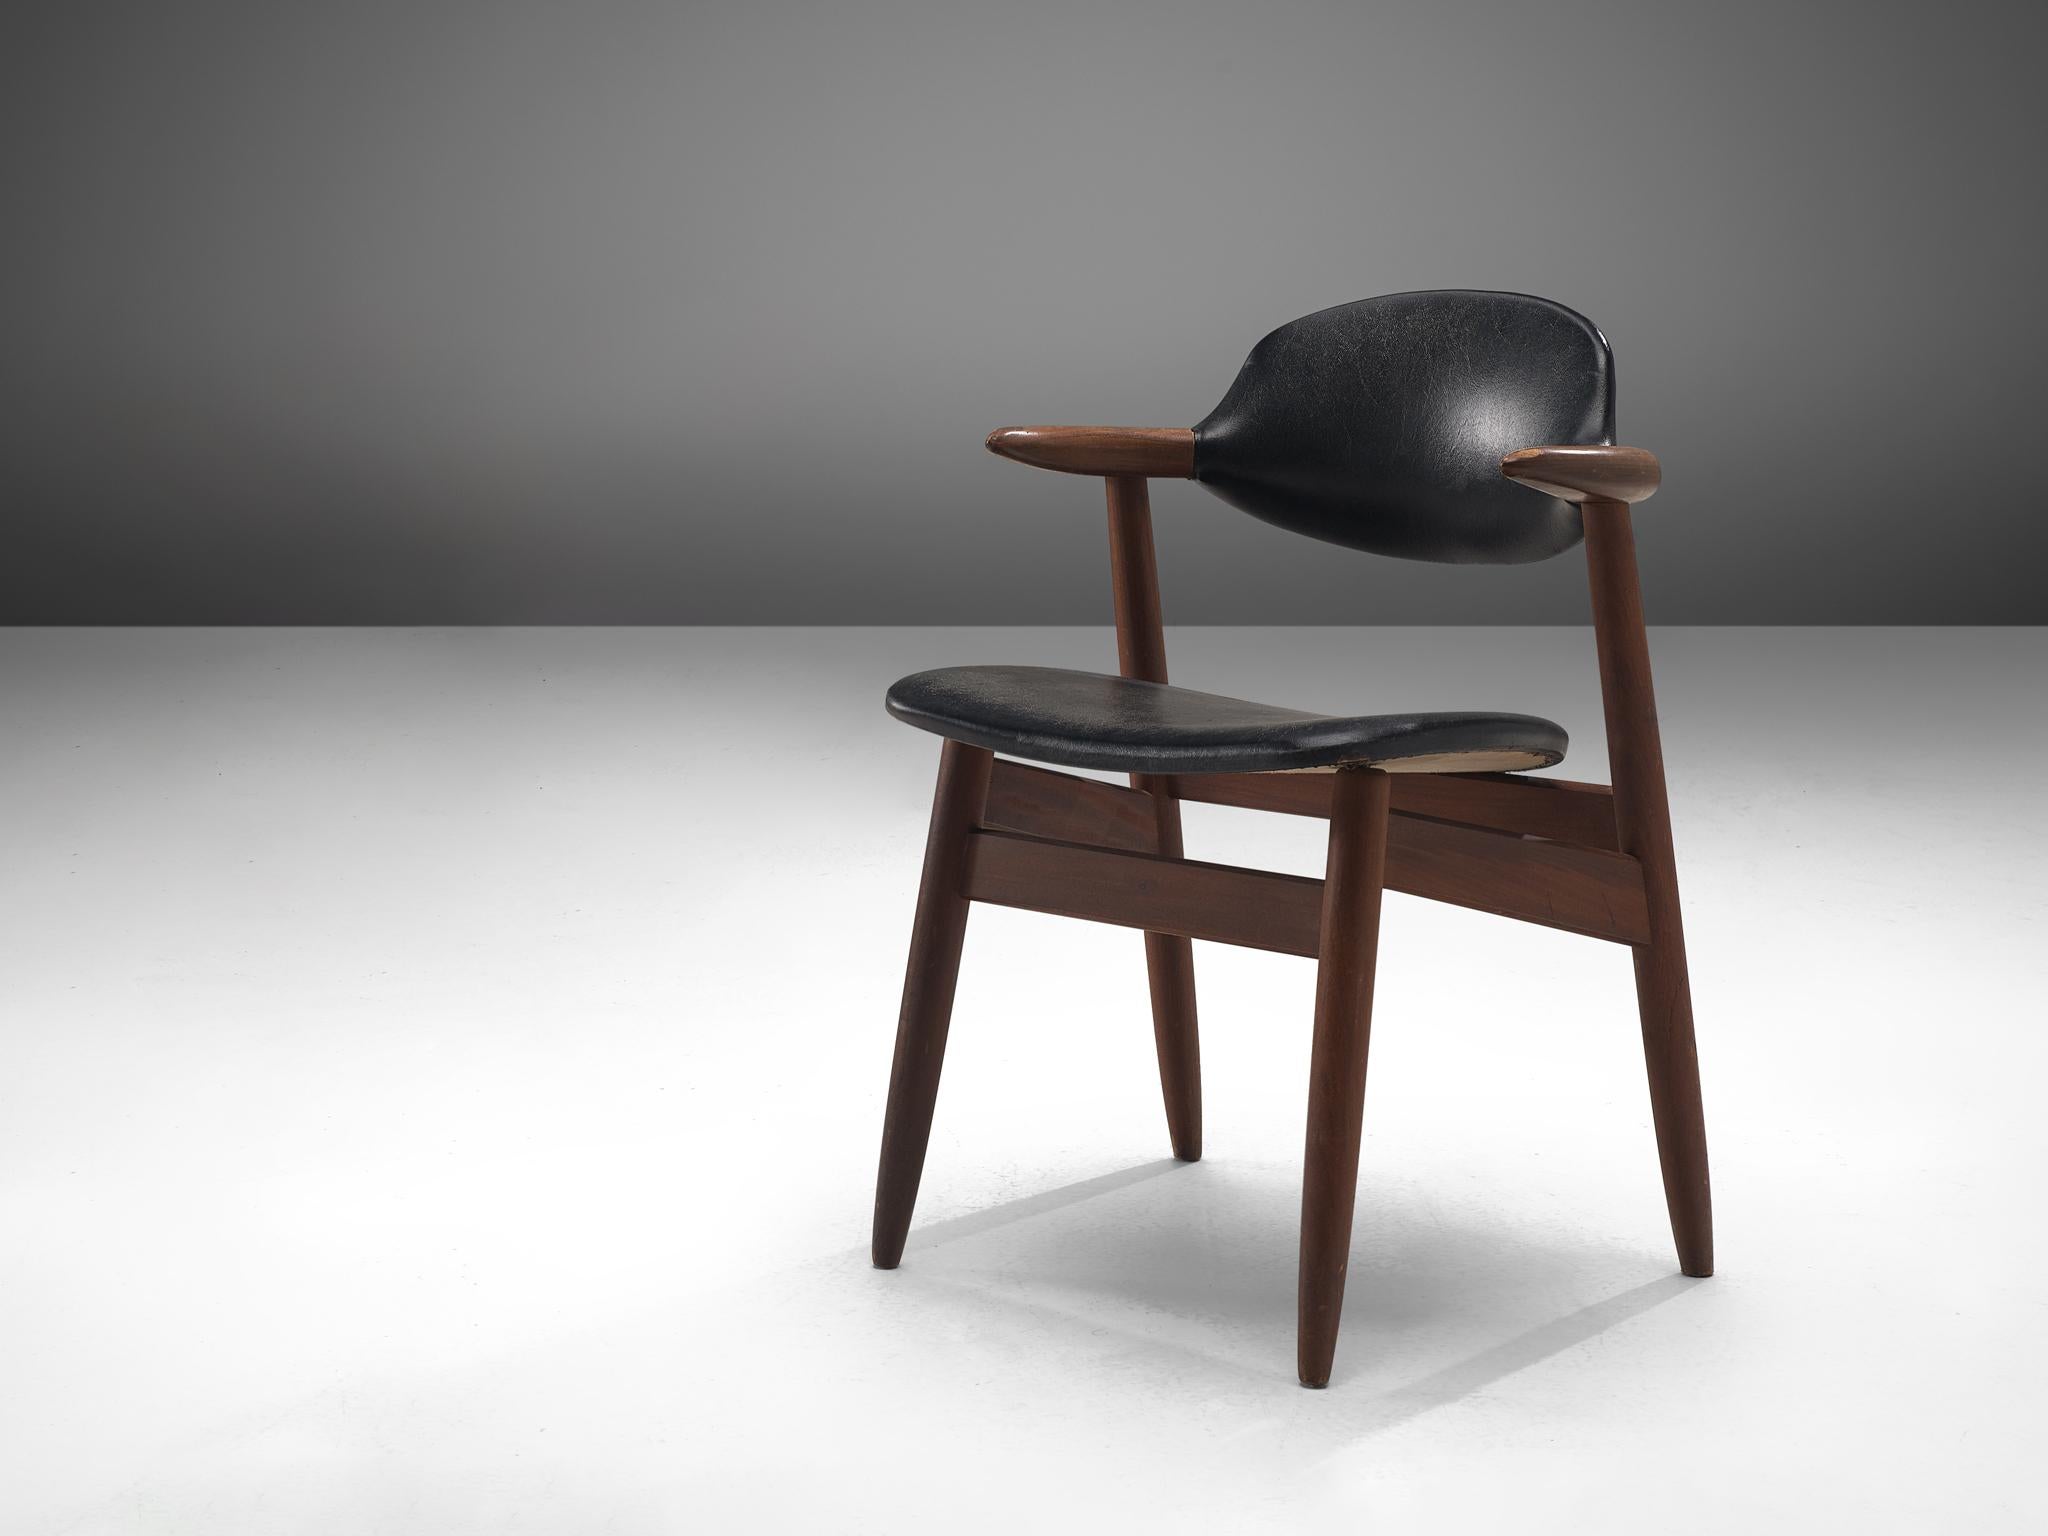 ‘Bullhorn’ dining chair, teak, leatherette, The Netherlands, 1960s

This dining chair from Dutch origin owes its name to the armrests that are based on the shape of a bull horn. The wooden frame illustrates a dynamic construction of sharp lines and